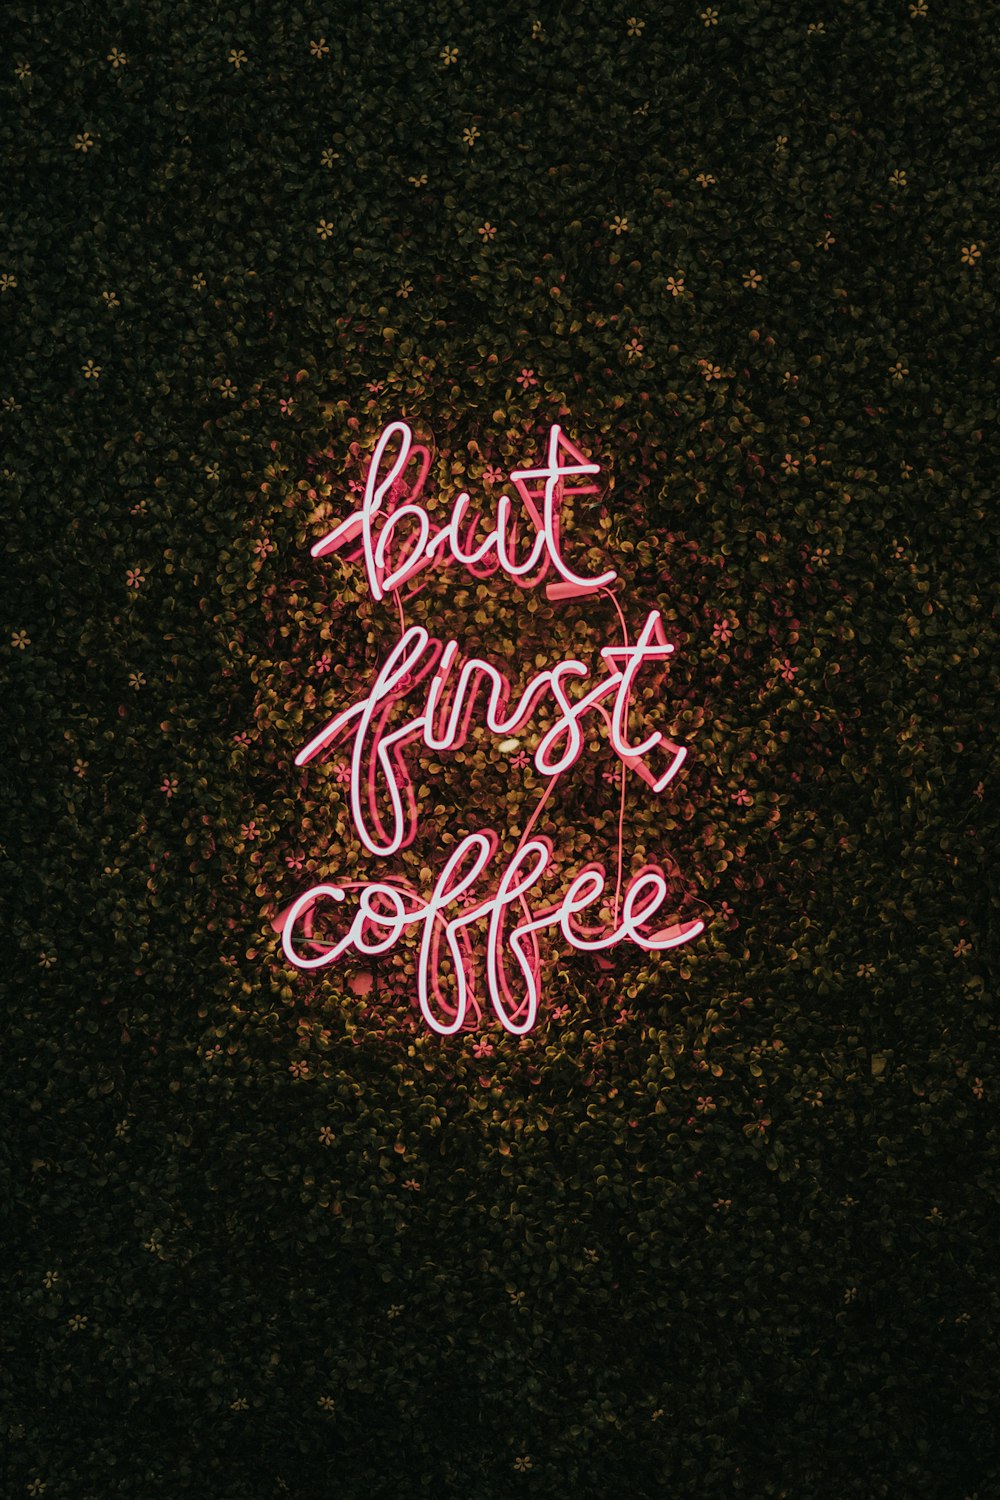 but first coffee